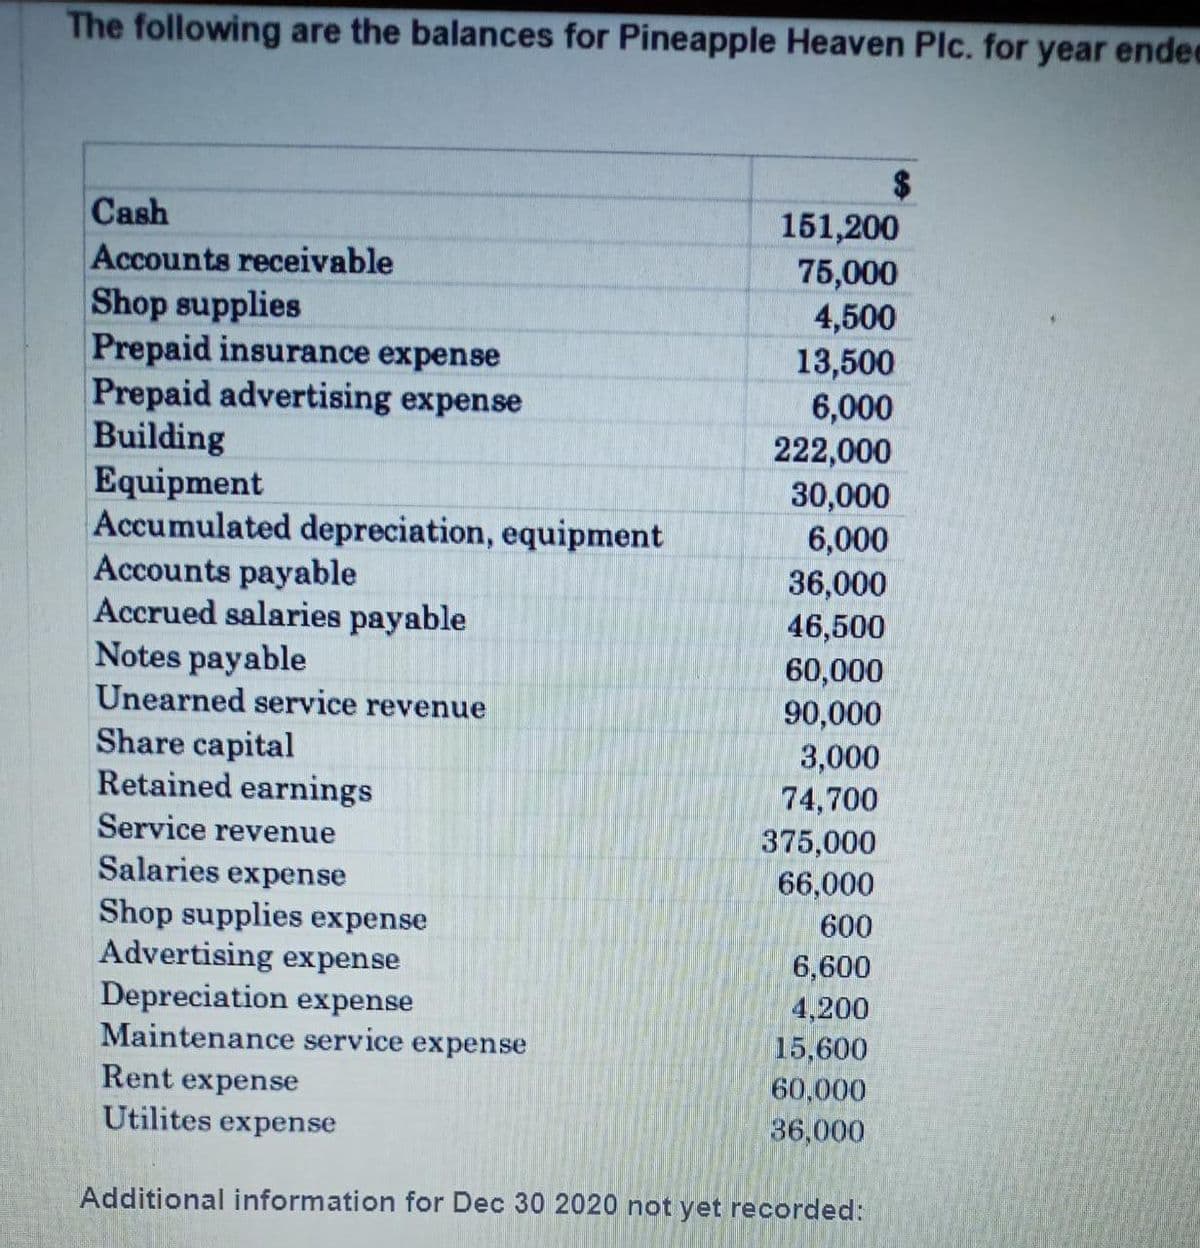 The following are the balances for Pineapple Heaven Plc. for year endee
2$
151,200
75,000
4,500
Cash
Accounts receivable
Shop supplies
Prepaid insurance expense
Prepaid advertising expense
Building
Equipment
Accumulated depreciation, equipment
Accounts payable
Accrued salaries payable
Notes payable
Unearned service revenue
13,500
6,000
222,000
30,000
6,000
36,000
46,500
60,000
90,000
3,000
74,700
375,000
66,000
Share capital
Retained earnings
Service revenue
Salaries expense
Shop supplies expense
Advertising expense
600
6,600
Depreciation expense
Maintenance service expense
4,200
15,600
Rent expense
60,000
Utilites expense
36,000
Additional information for Dec 30 2020 not yet recorded:
